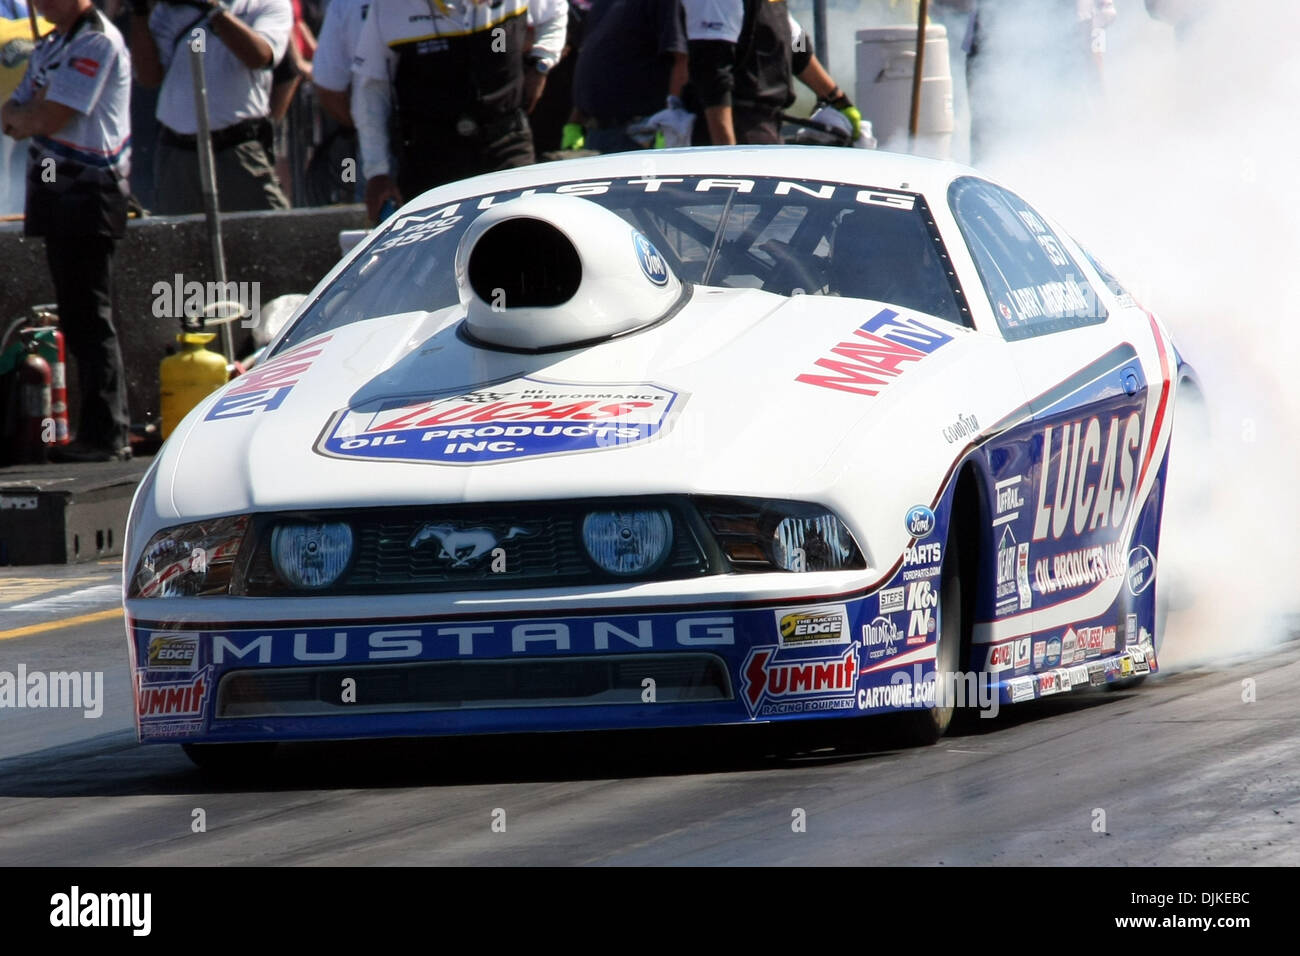 Sept. 4, 2010 - Indianapolis, Indiana, United States of America - 04 September2010: Larry Morgan does a burnout in his Ford Mustang. The U.S. Nationals were held at O'Reilly Raceway Park in Indianapolis, Indiana. (Credit Image: © Alan Ashley/Southcreek Global/ZUMApress.com) Stock Photo